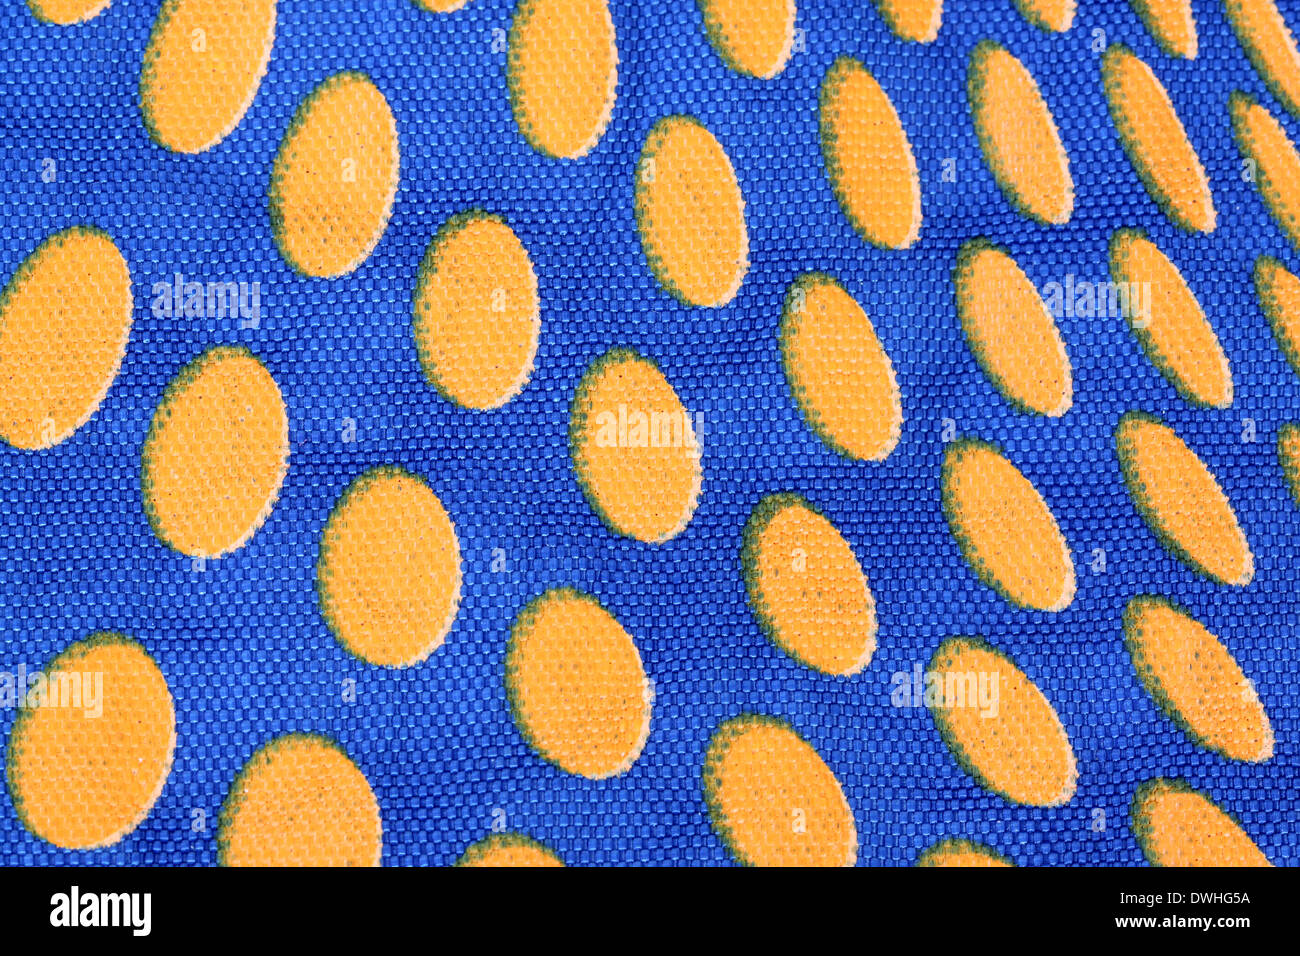 Blue Cloth bag with orange dots for background. Stock Photo